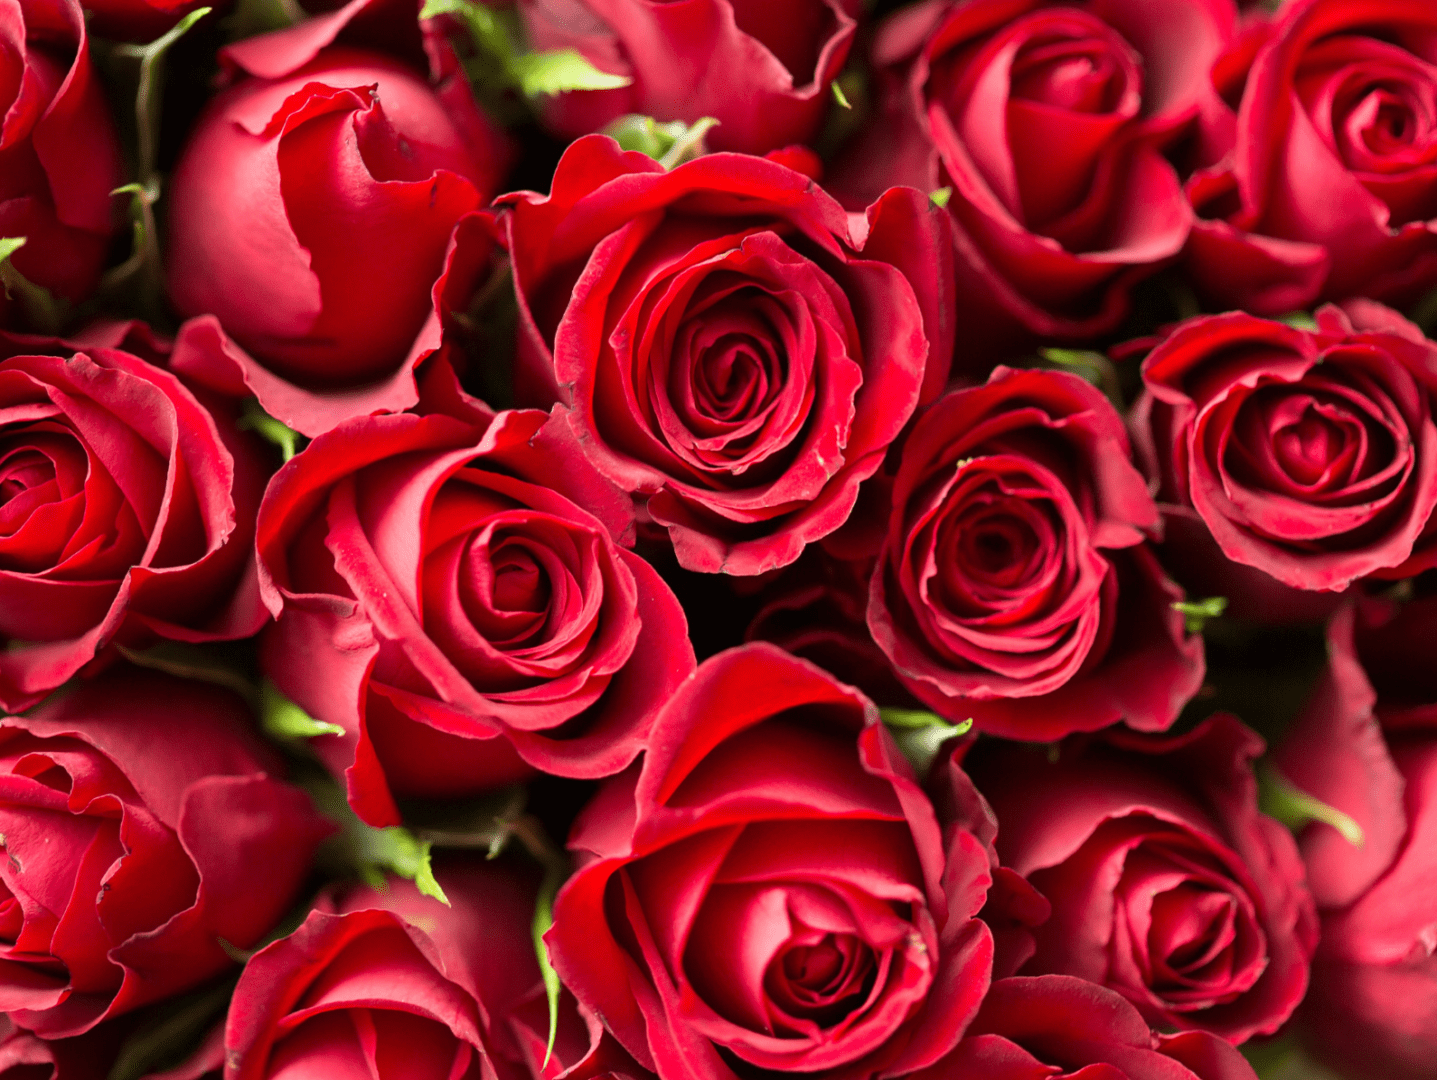 A close up of red roses in the bouquet